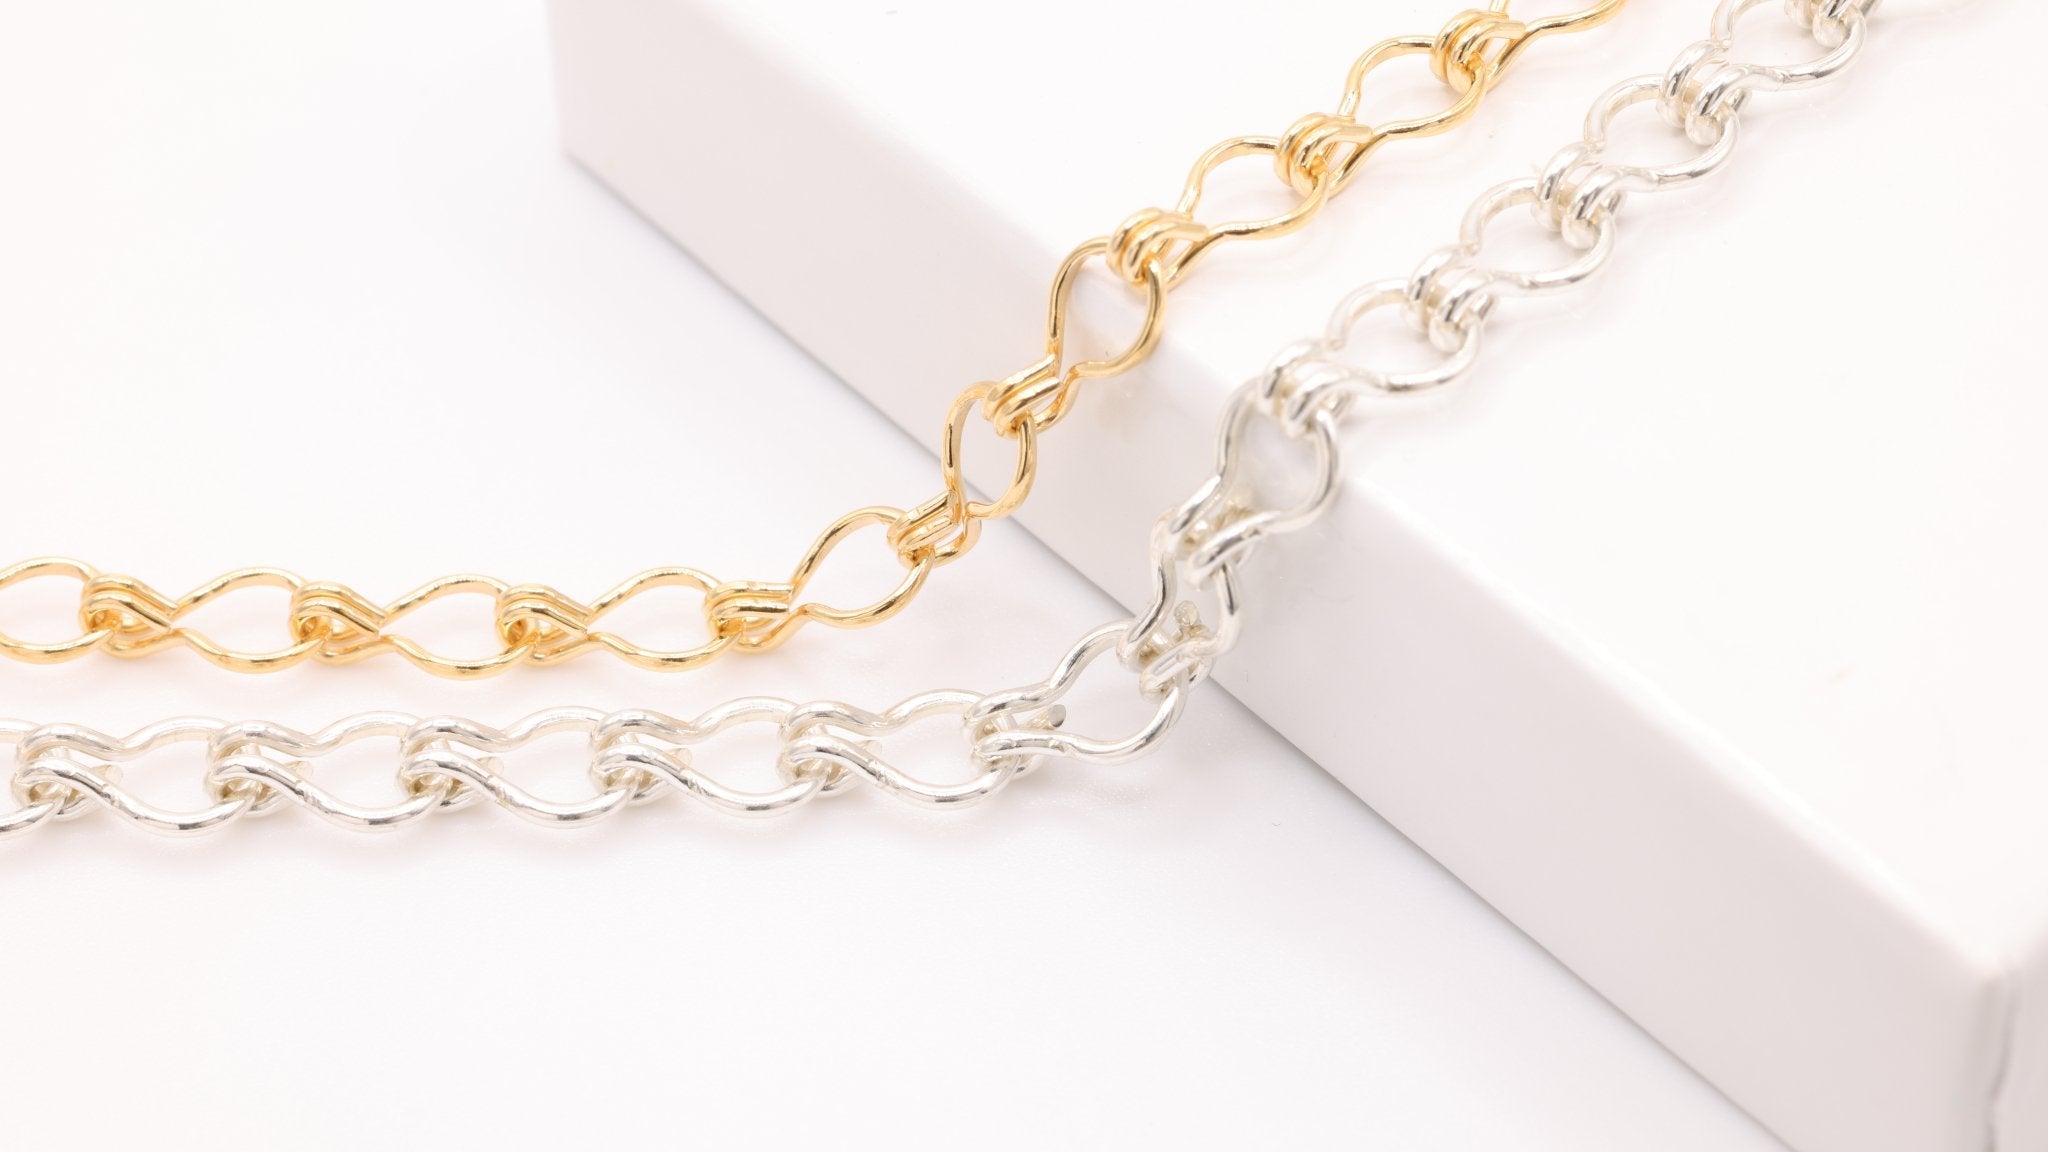 Wholesale Ladder Jewelry Chain - HarperCrown